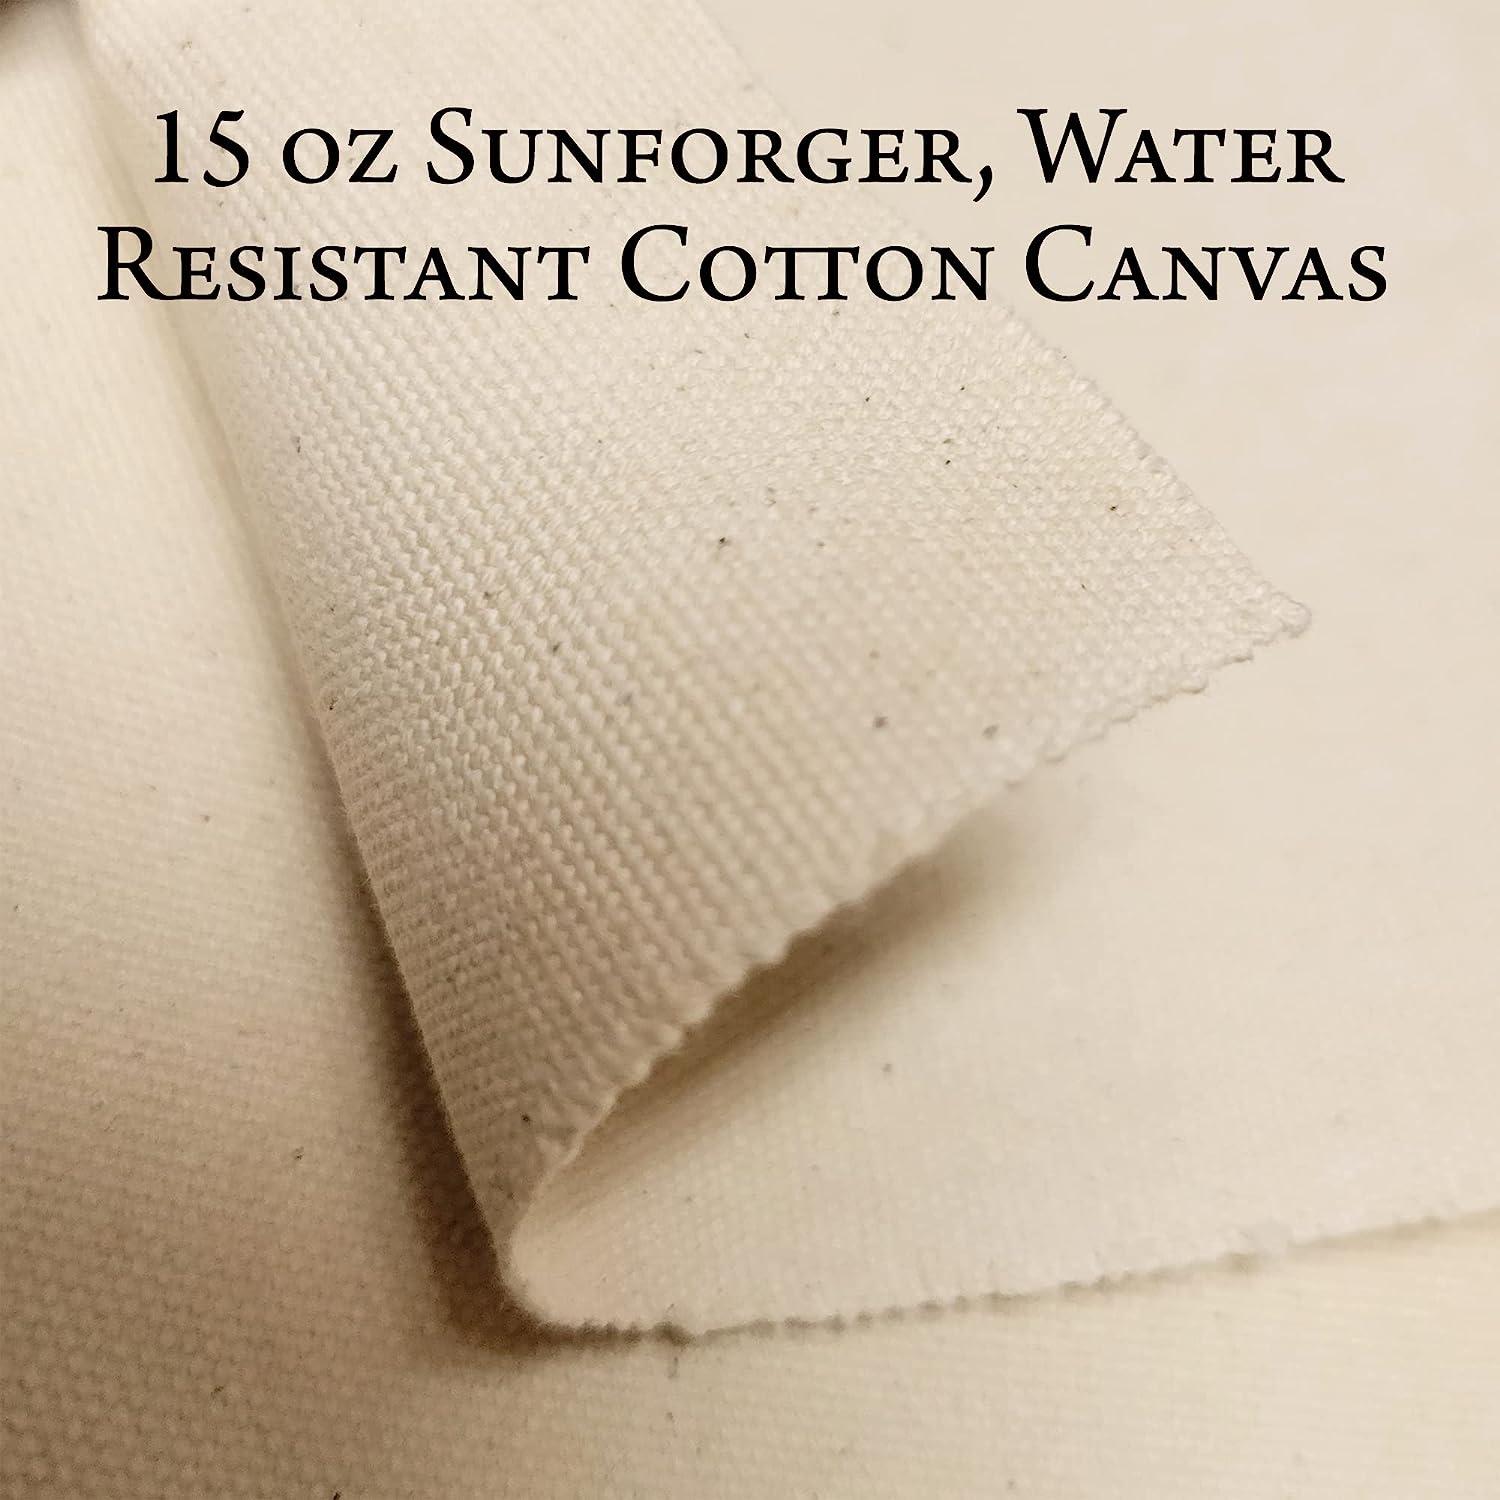 Cotton Canvas Fabric 12 OZ - Water Resistant Treated